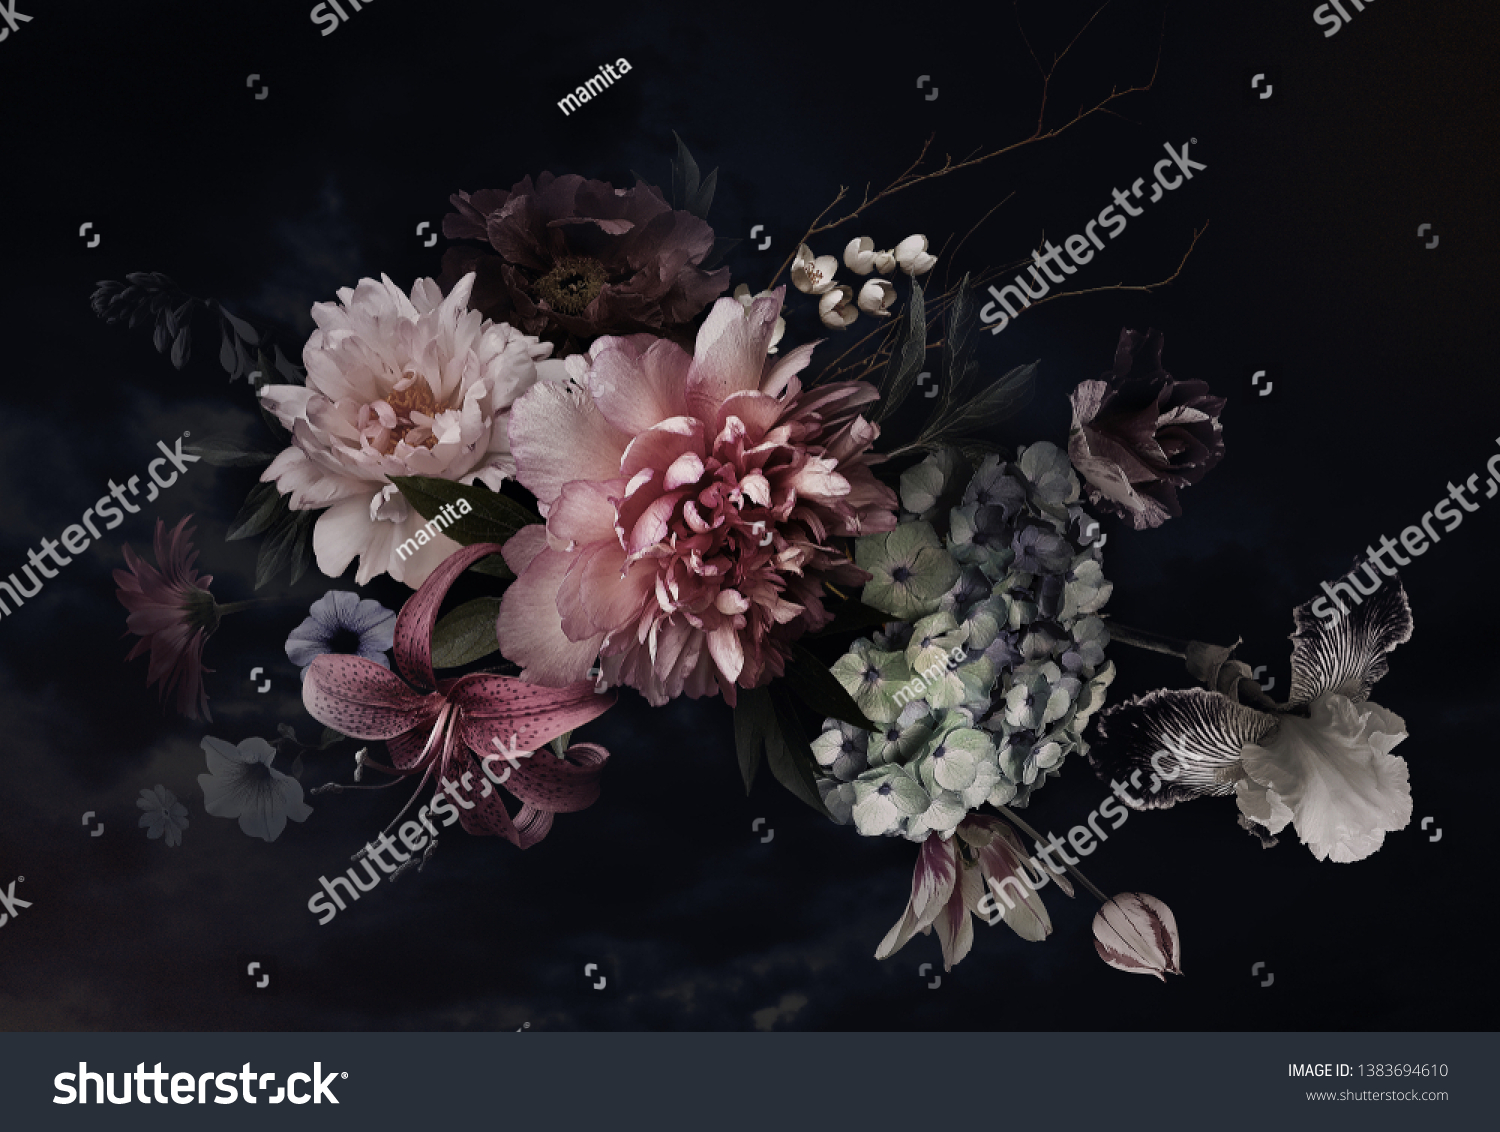 Vintage flowers. Peonies, tulips, lily, hydrangea on black. Floral background. Baroque style floristic illustration. #1383694610